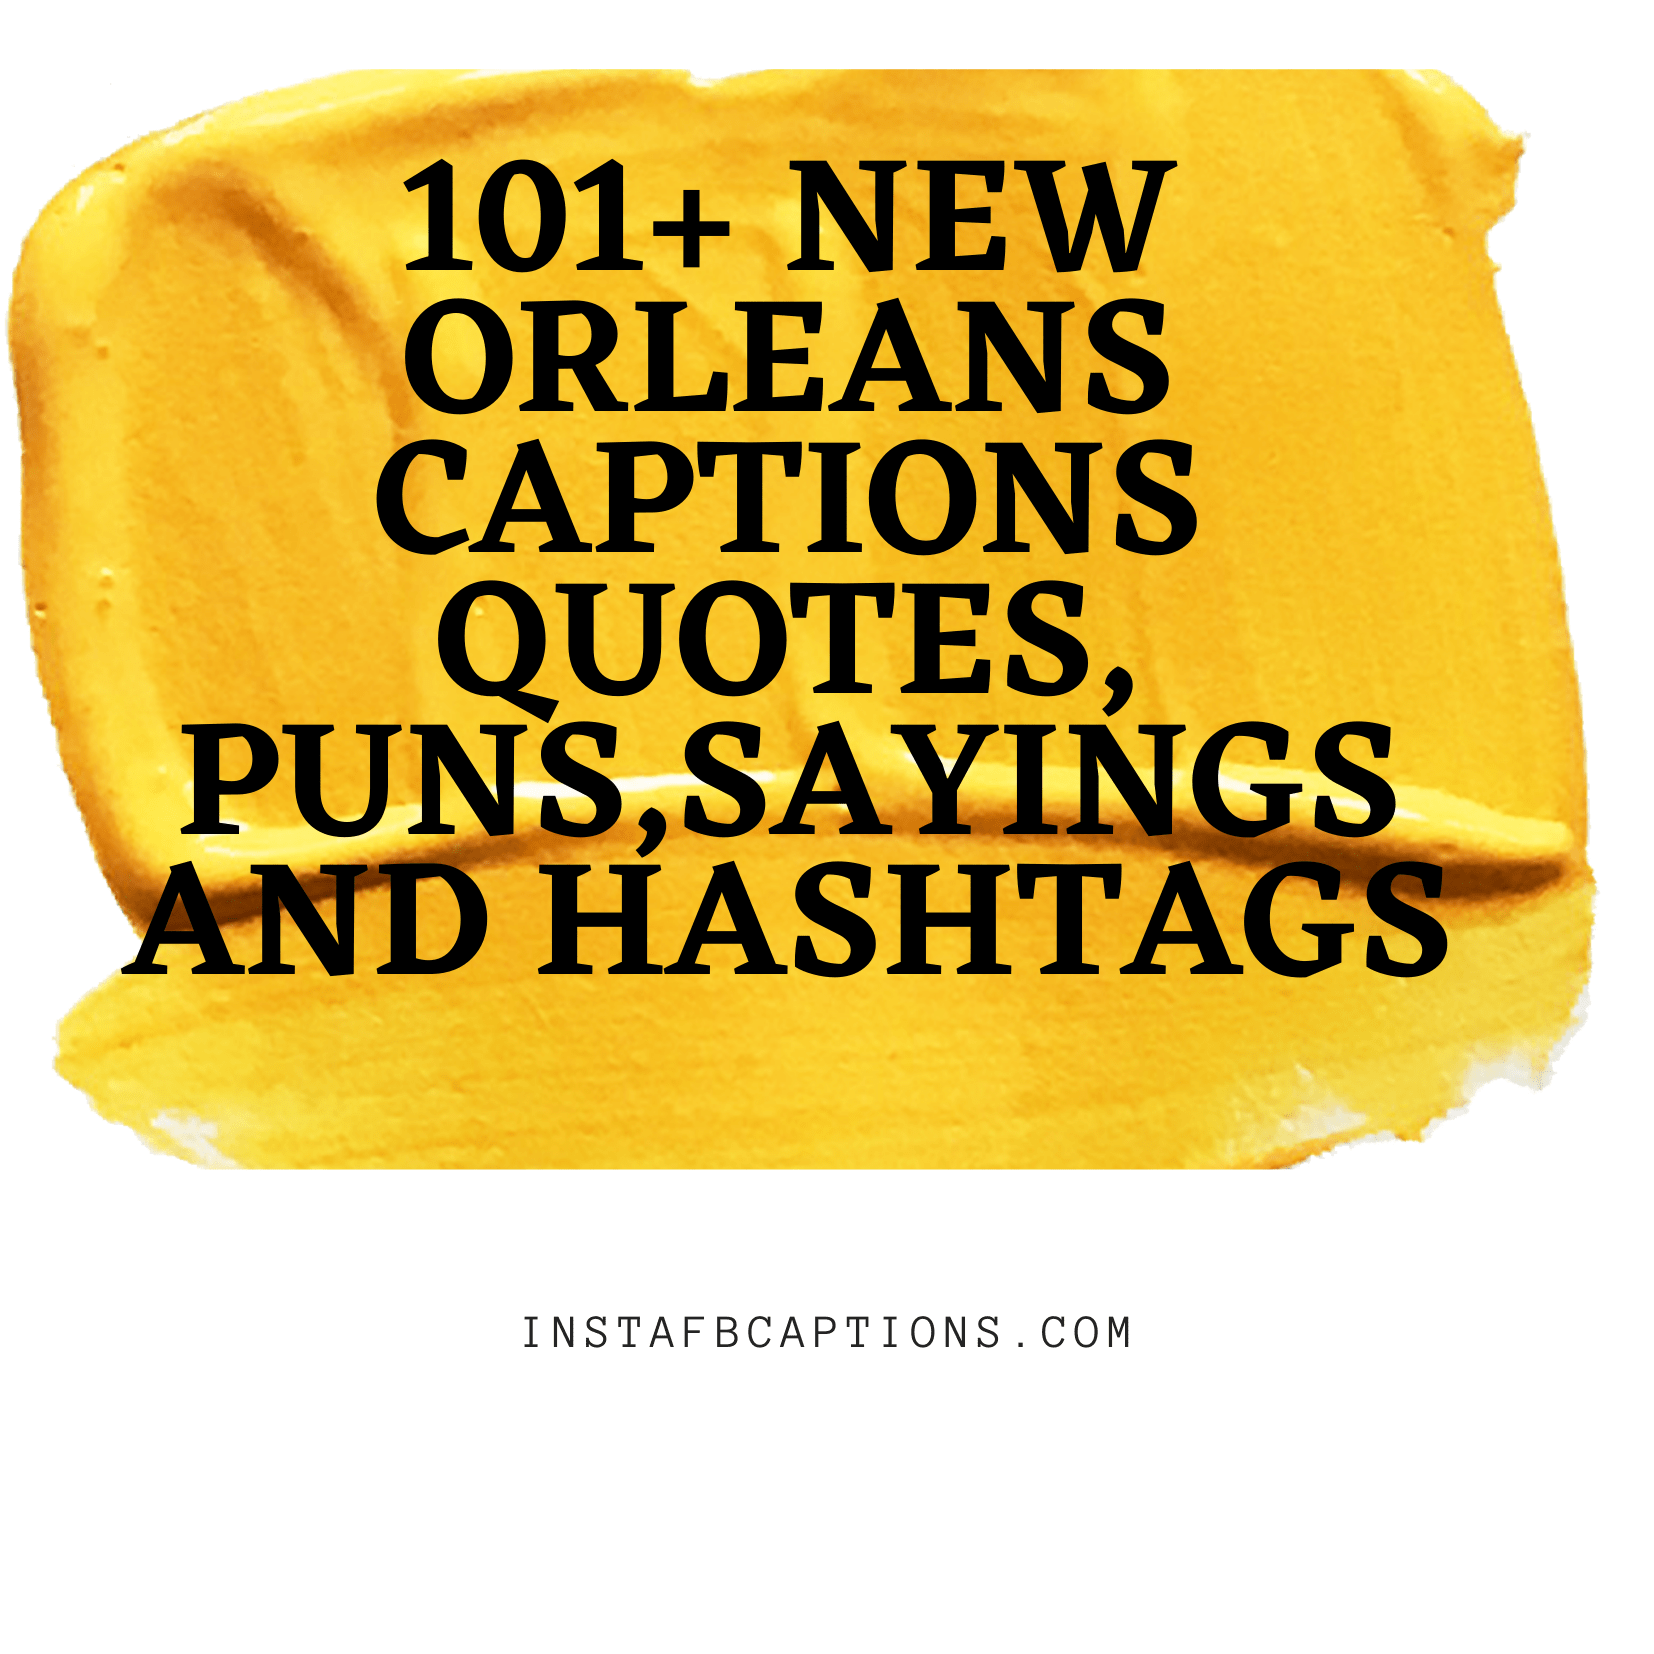 101+ New Orleans Captions Quotes Puns Sayings And Hashtags  - 101 New Orleans Captions Quotes Puns Sayings and Hashtags - Funny New Orleans Captions Quotes for Instagram Posts in 2023